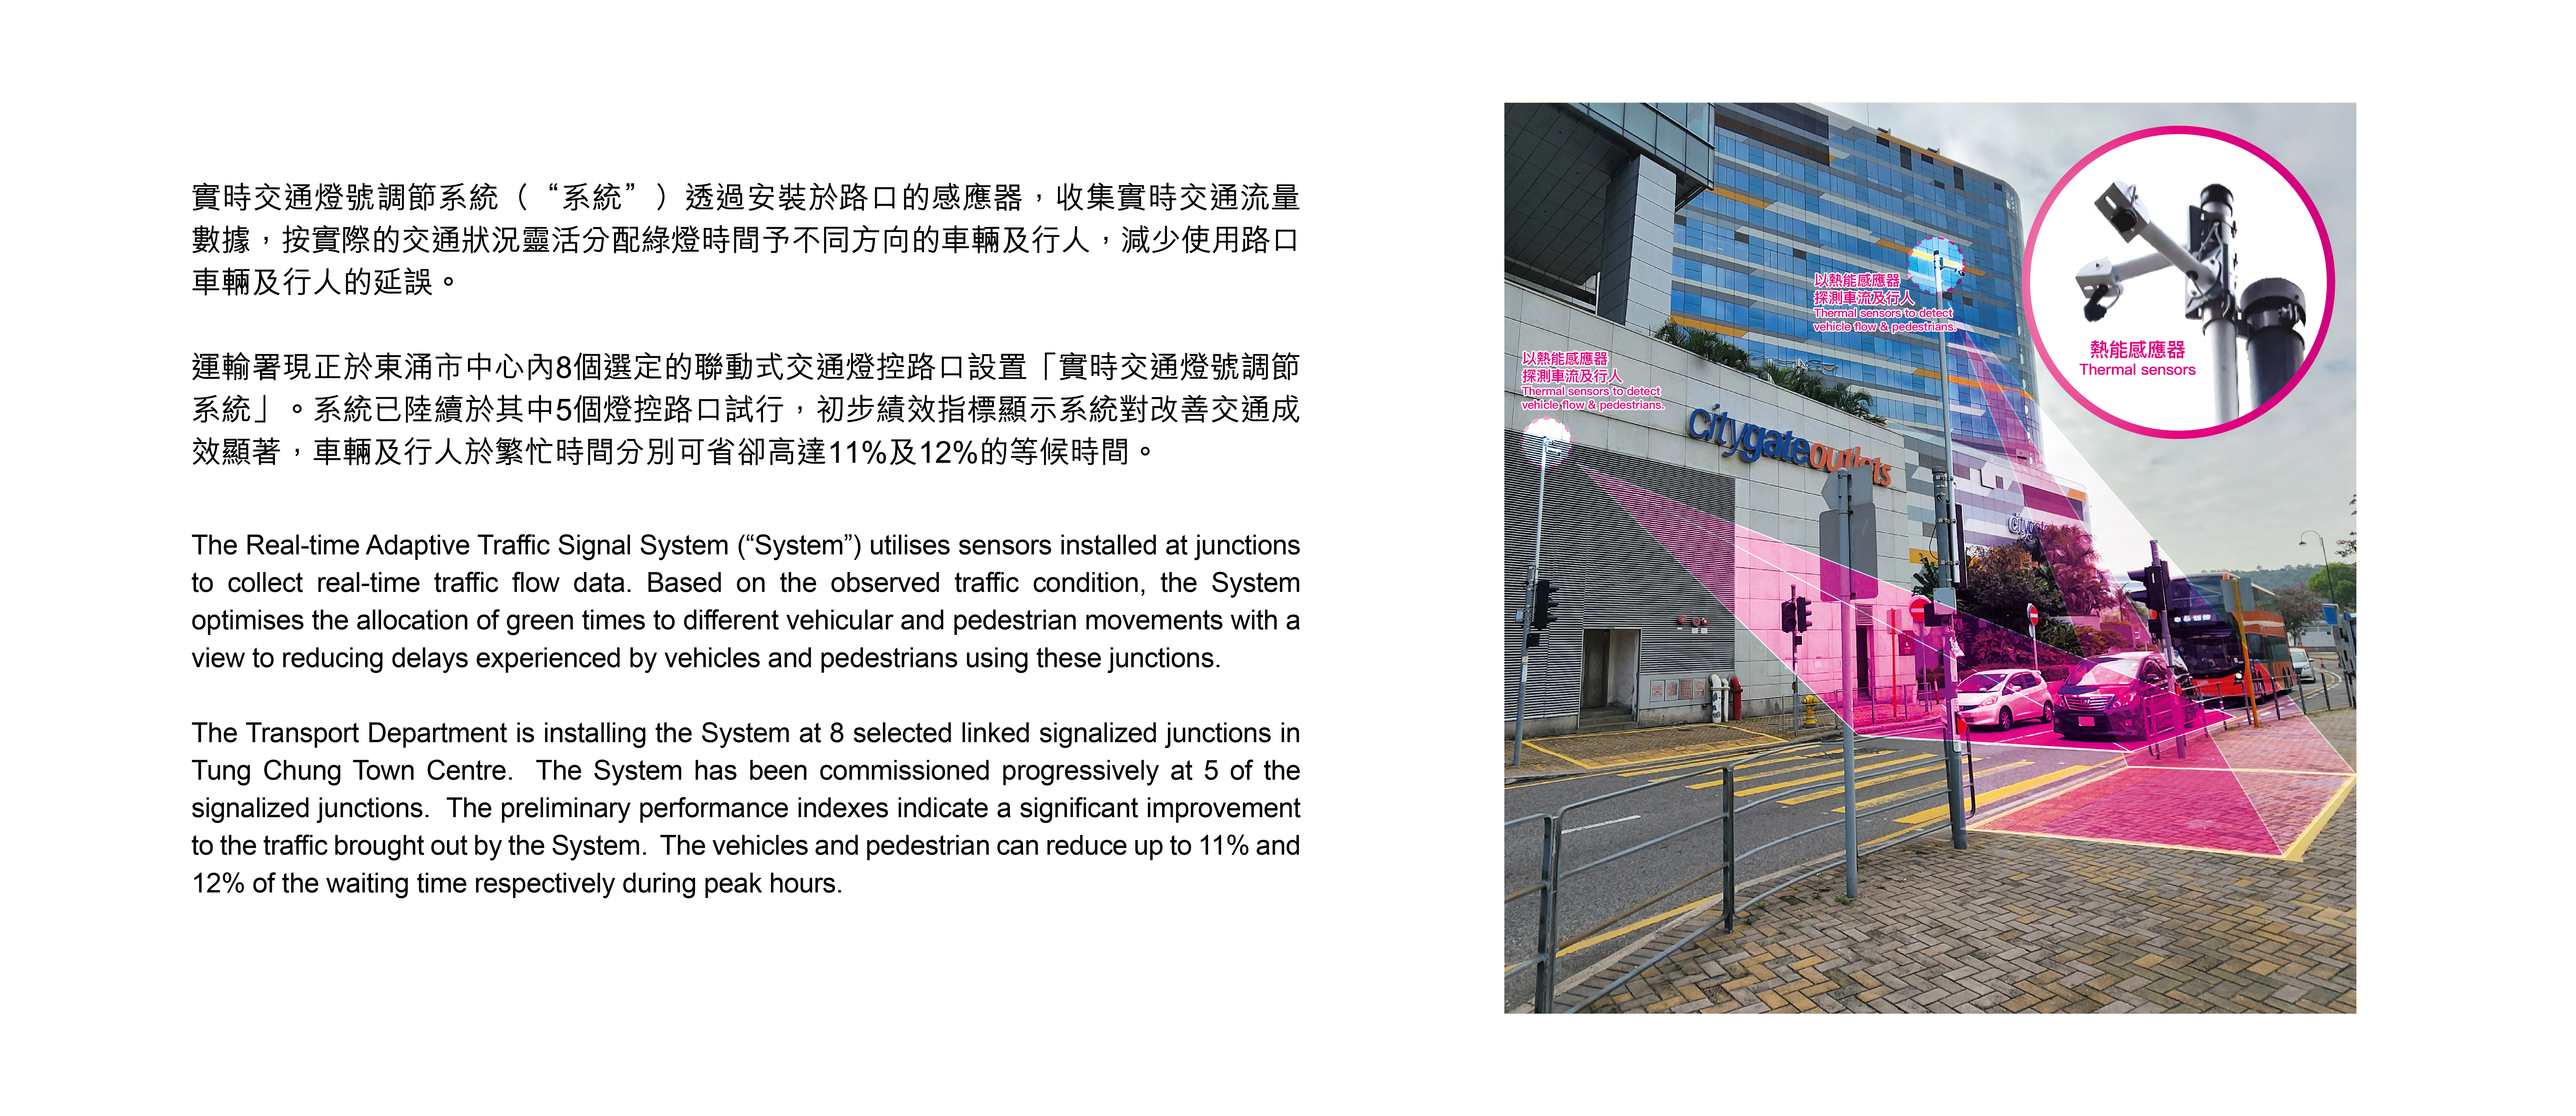 Real-time Adaptive Traffic Signal System in Tung Chung